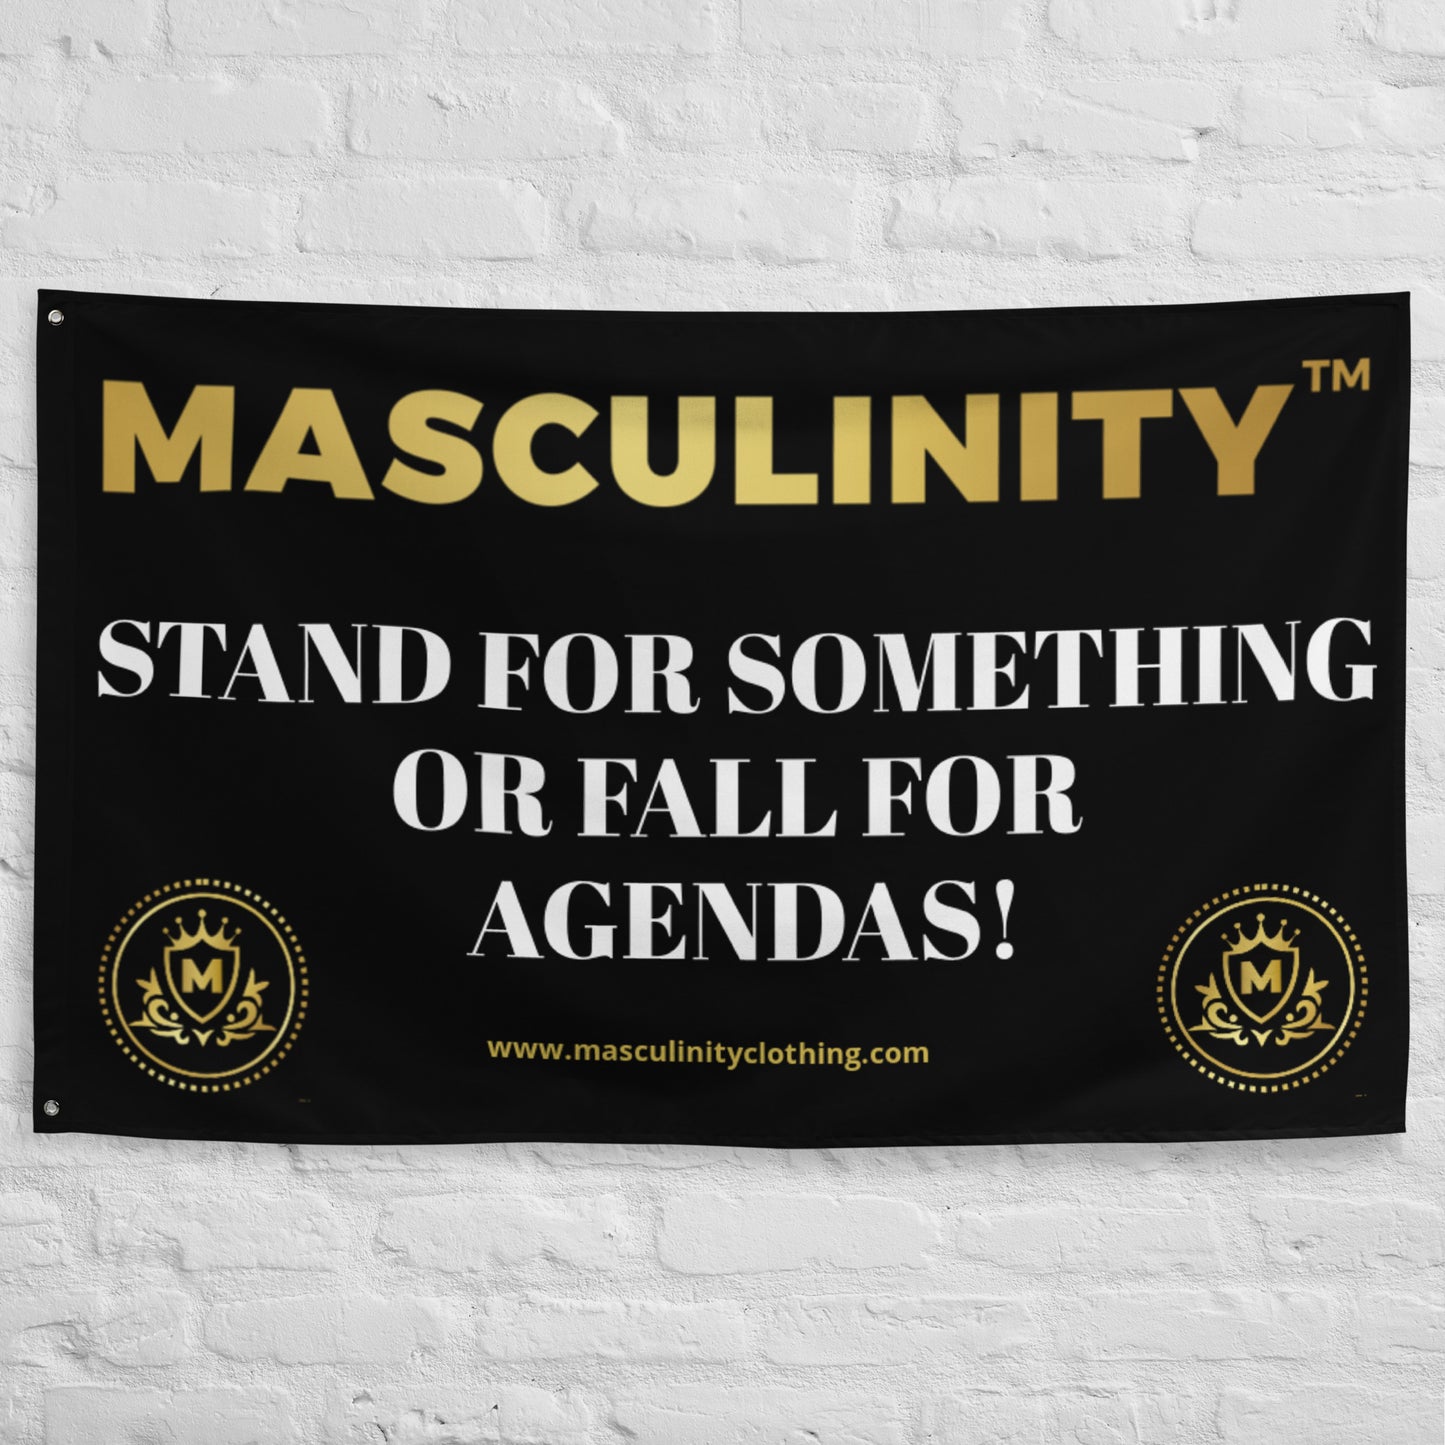 STAND FOR SOMETHING OR FALL FOR AGENDAS! MASCULINITY FLAG